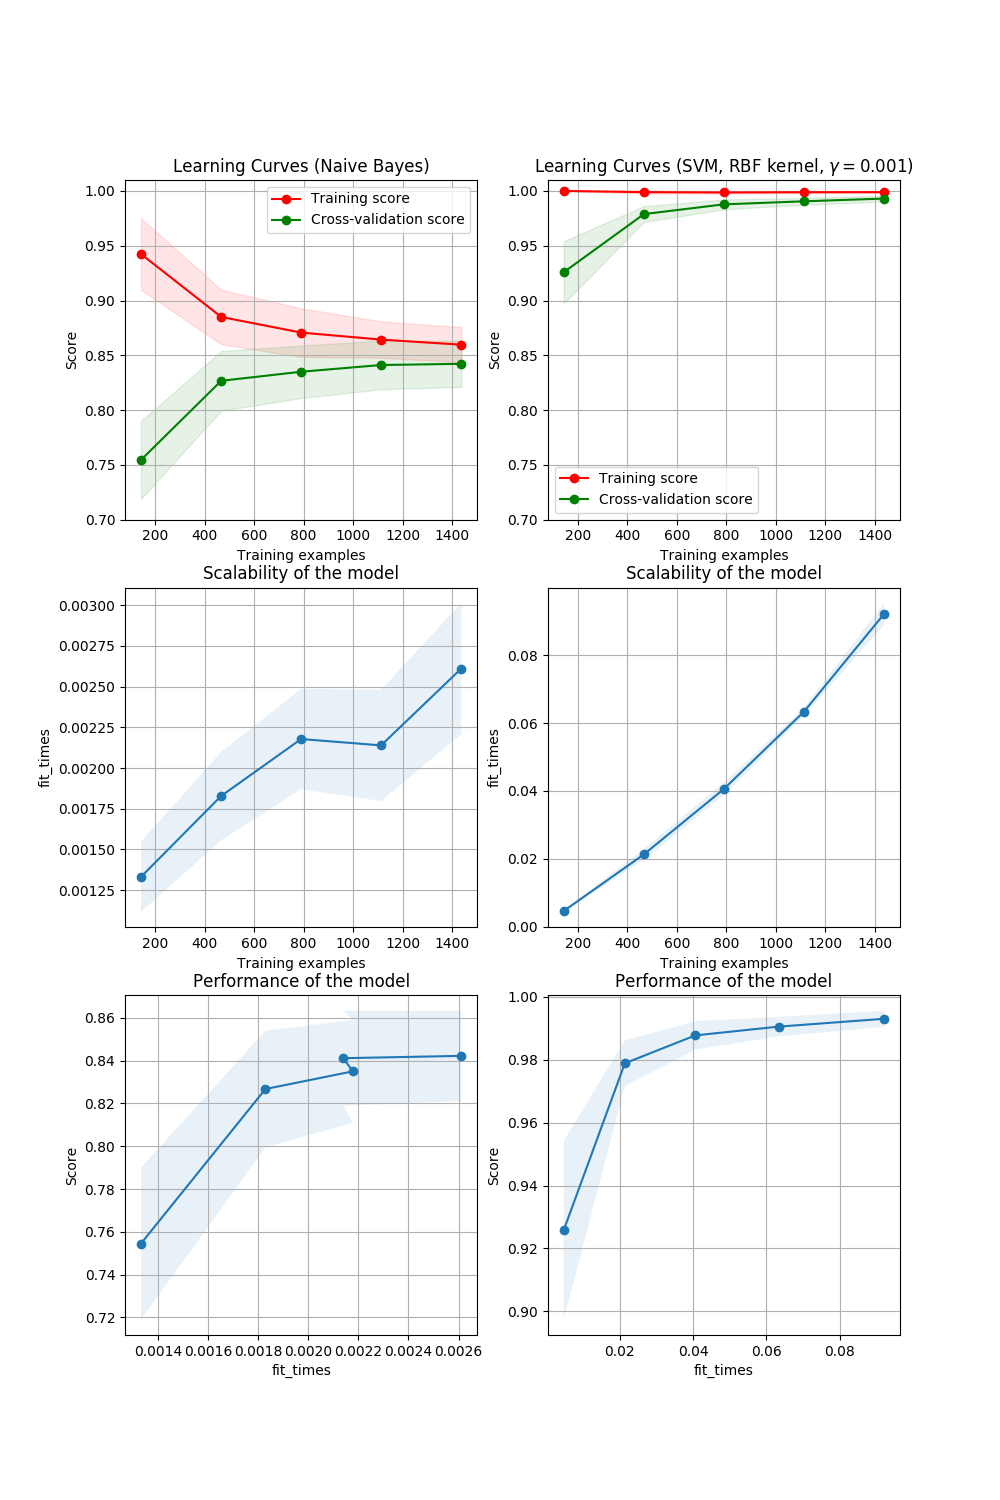 ../../_images/sphx_glr_plot_learning_curve_001.png